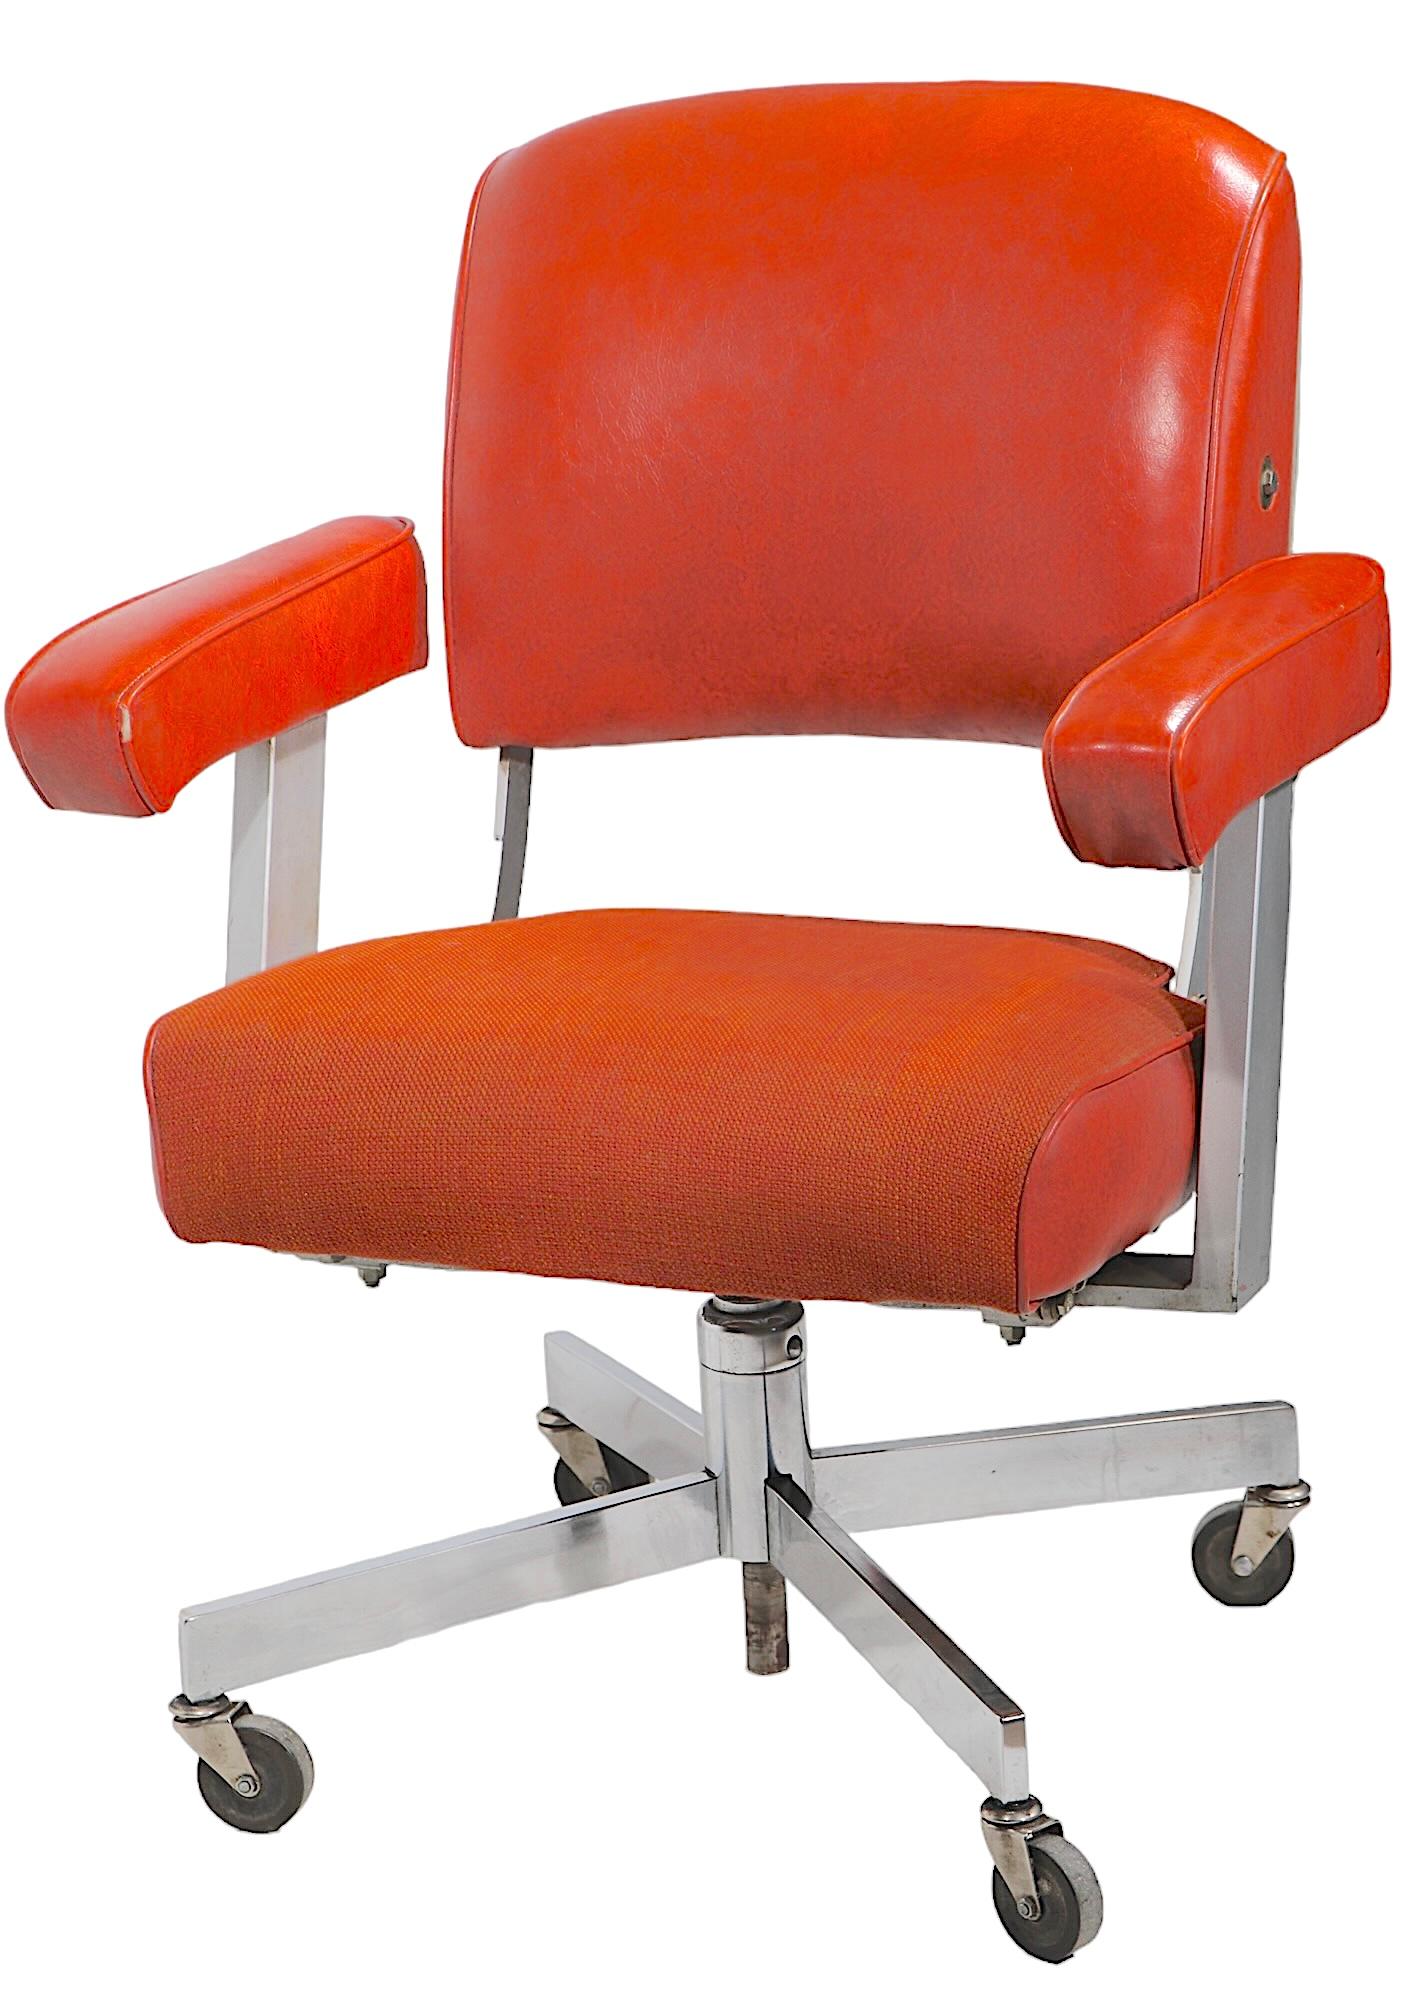 Executive Model DoMore Swivel Desk Office Chair Model 616 c 1950/1960's  For Sale 2